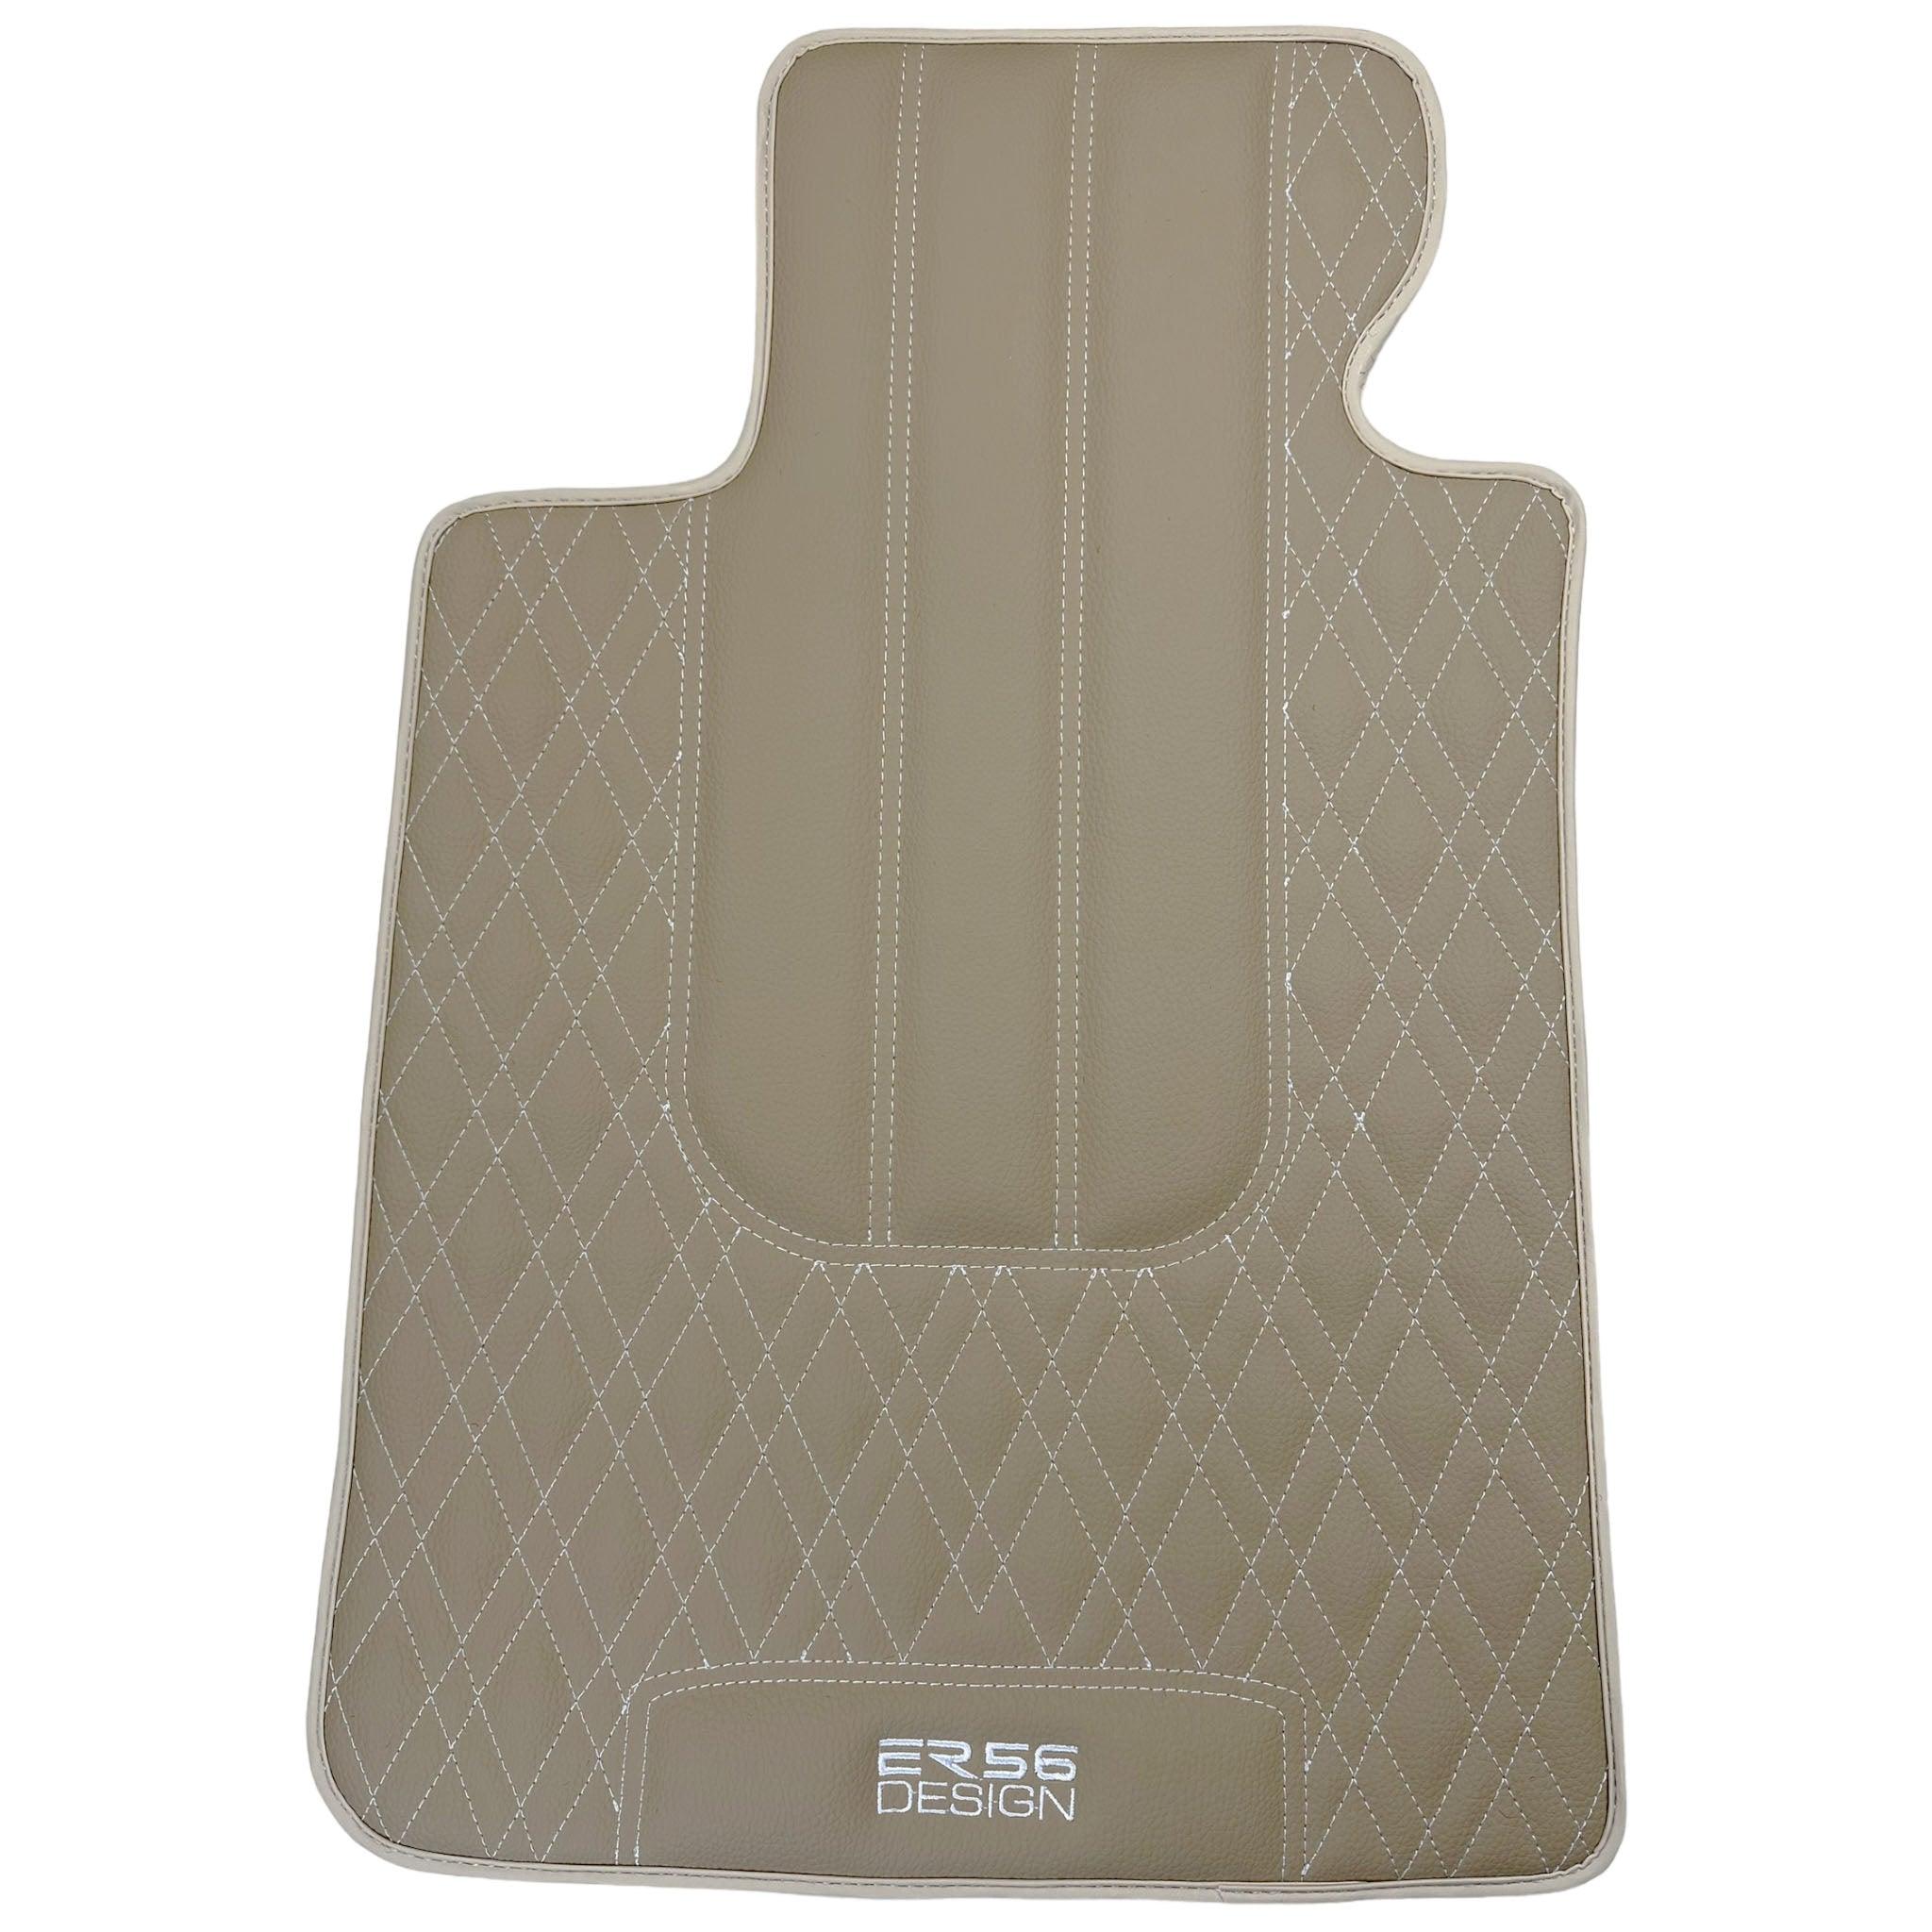 Beige Leather Floor Mats For BMW X6M E71 SUV